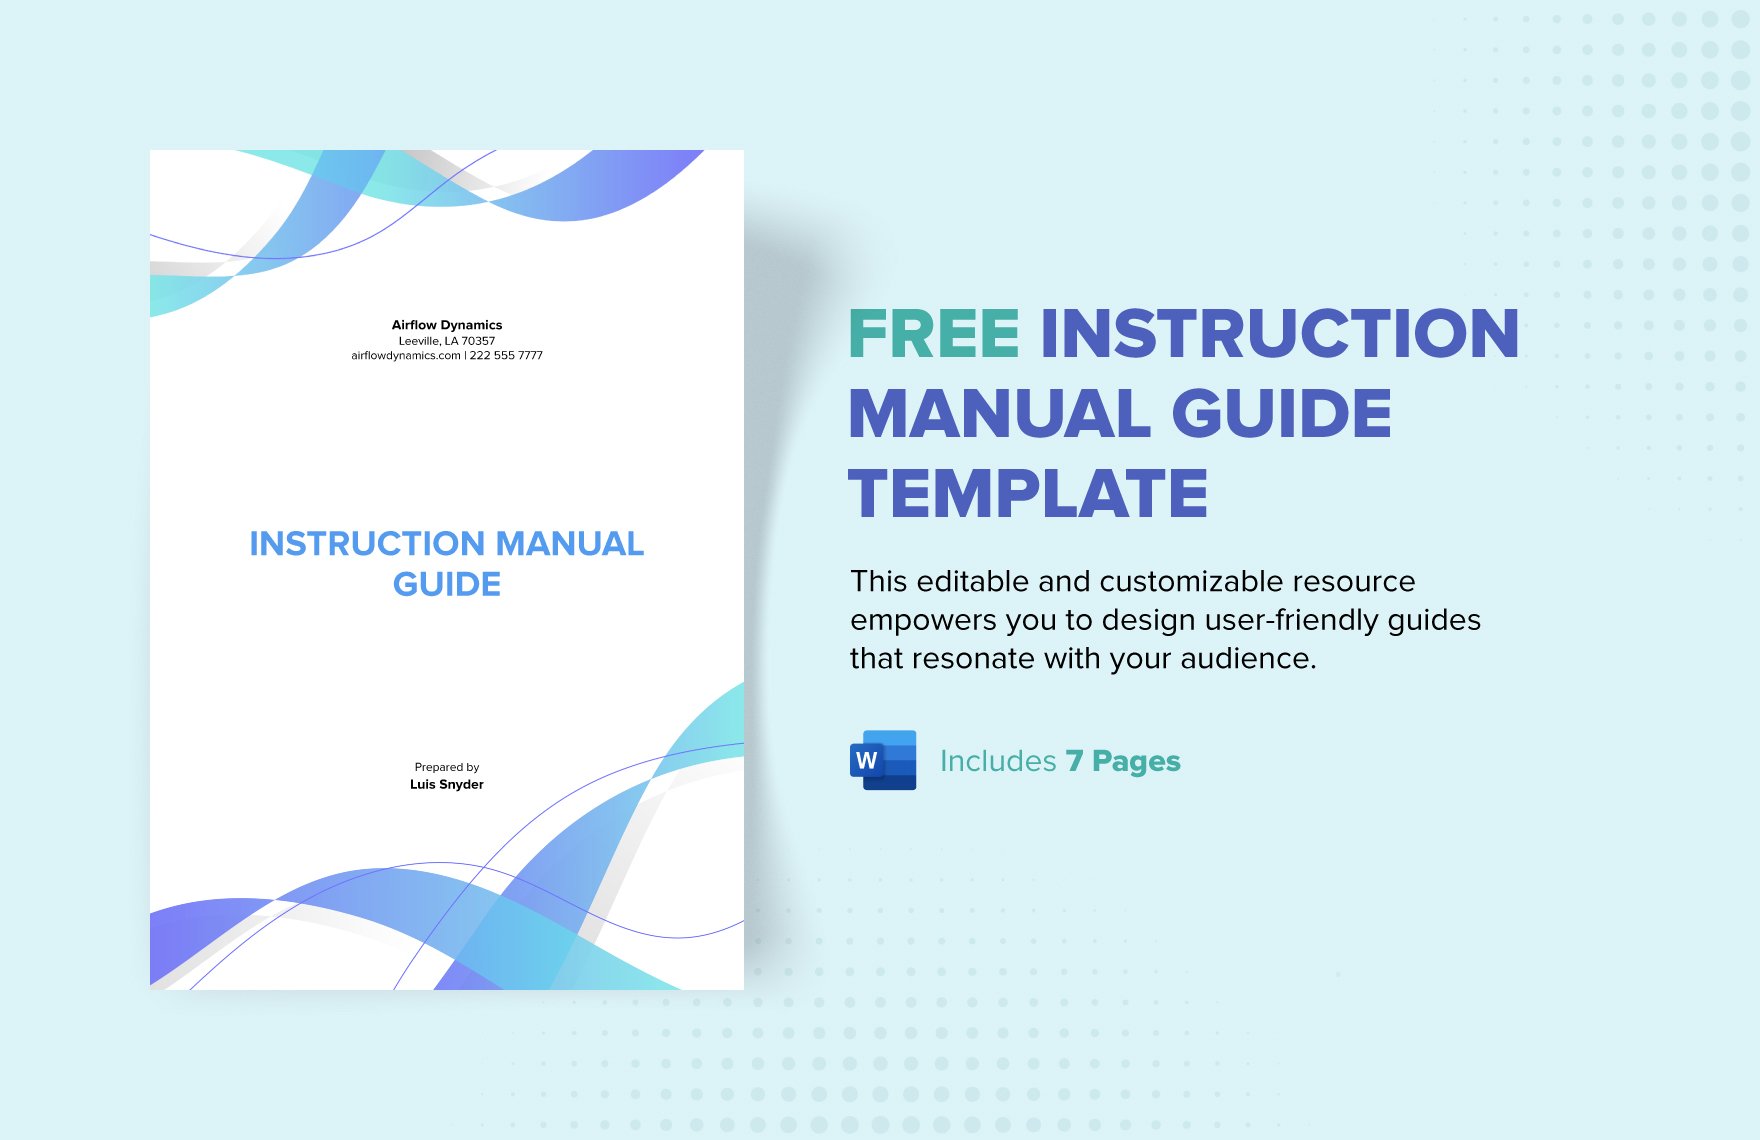 Free Instruction Manual Guide Template